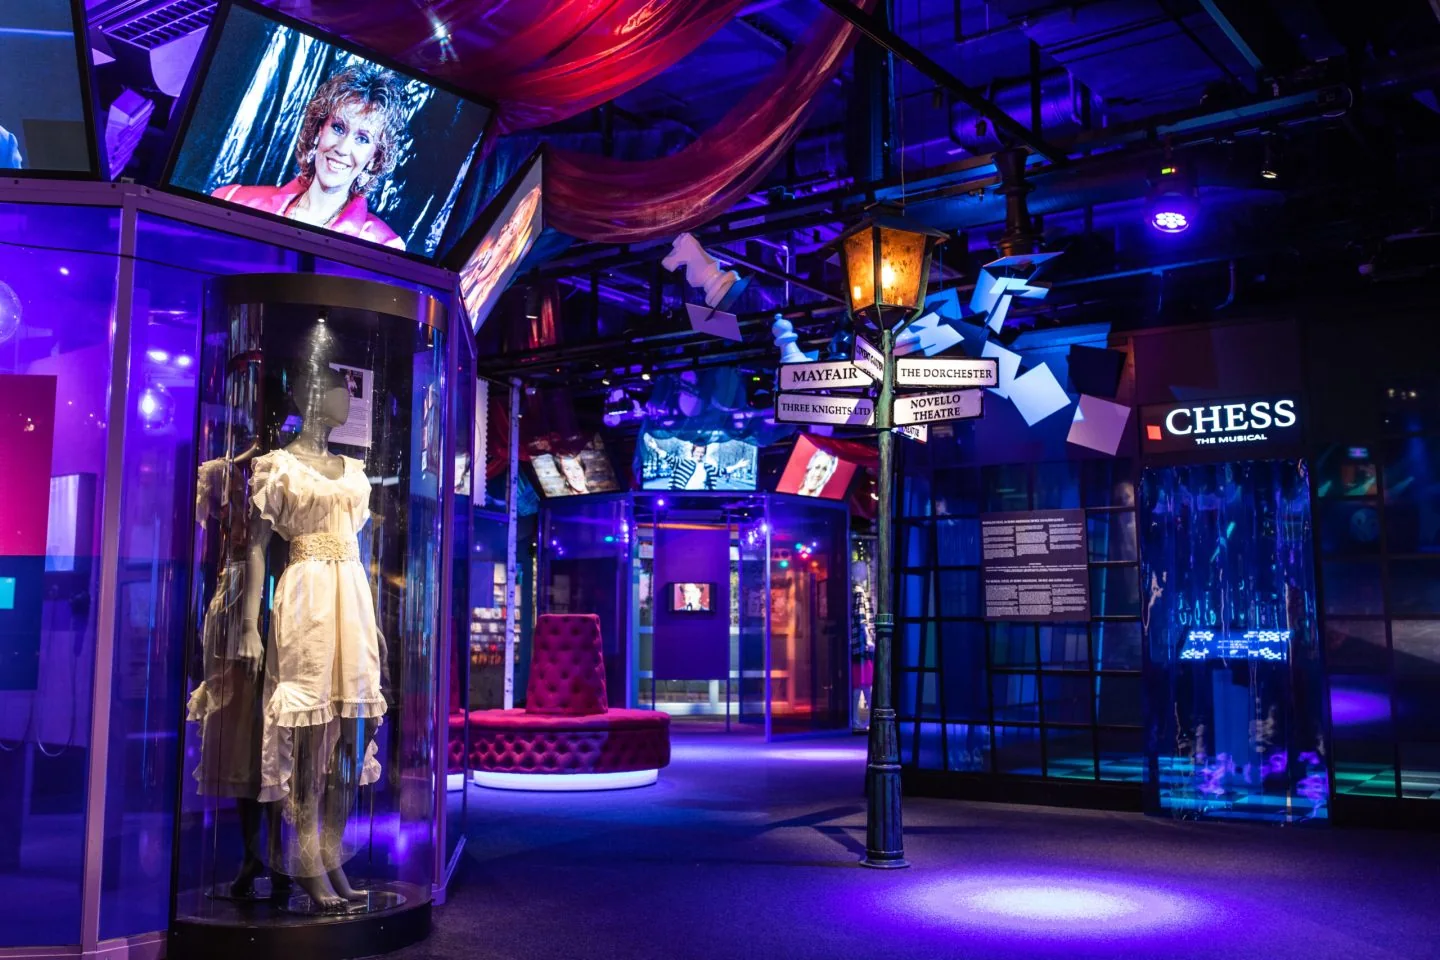 Visit the ABBA Museum